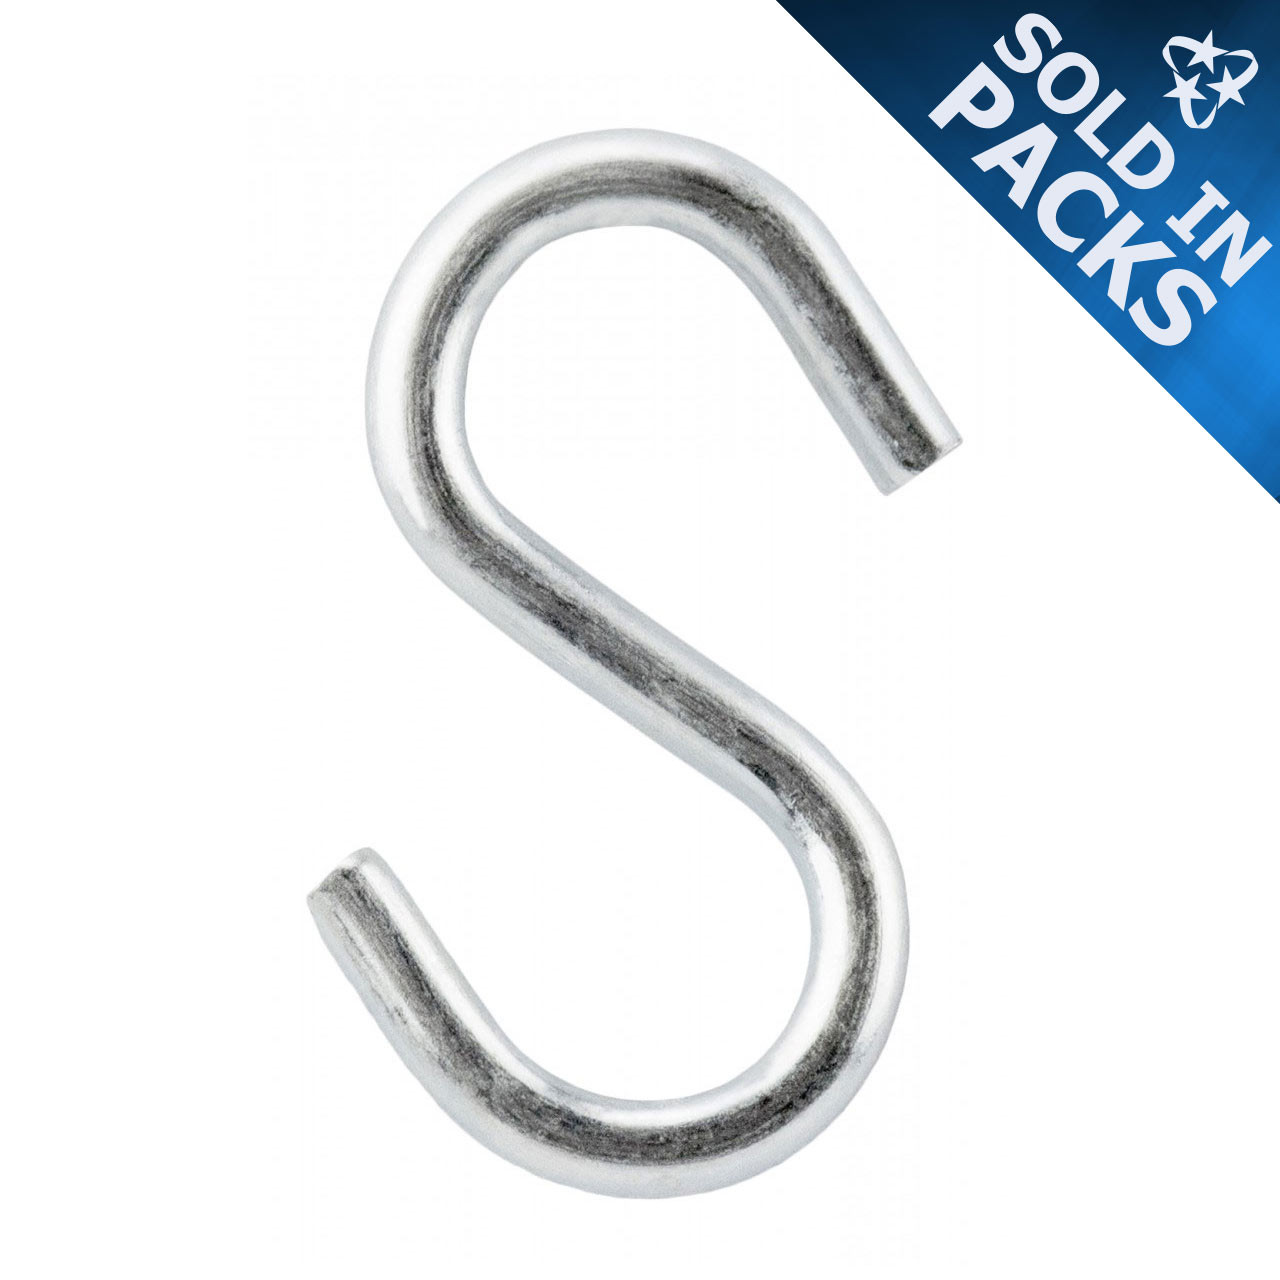 M8 SUS 304 S Shaped Hook / S Shackle Stainless Steel / S Hook